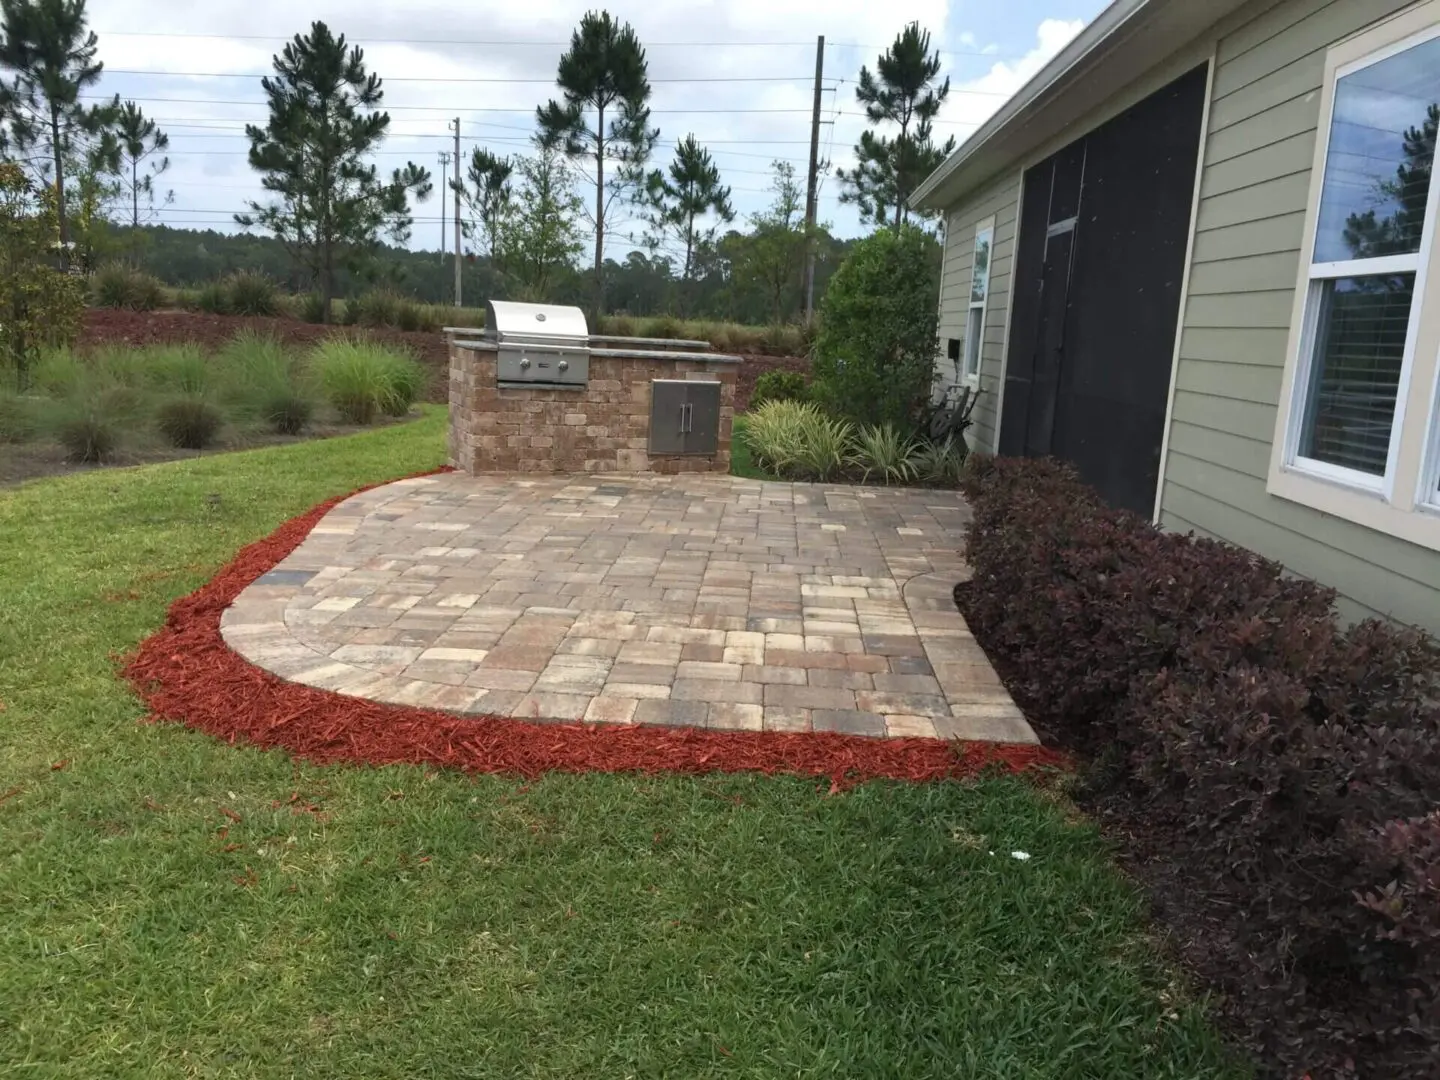 Paved patio area with an integrated grill beside a house with fresh red mulch and shrubbery.